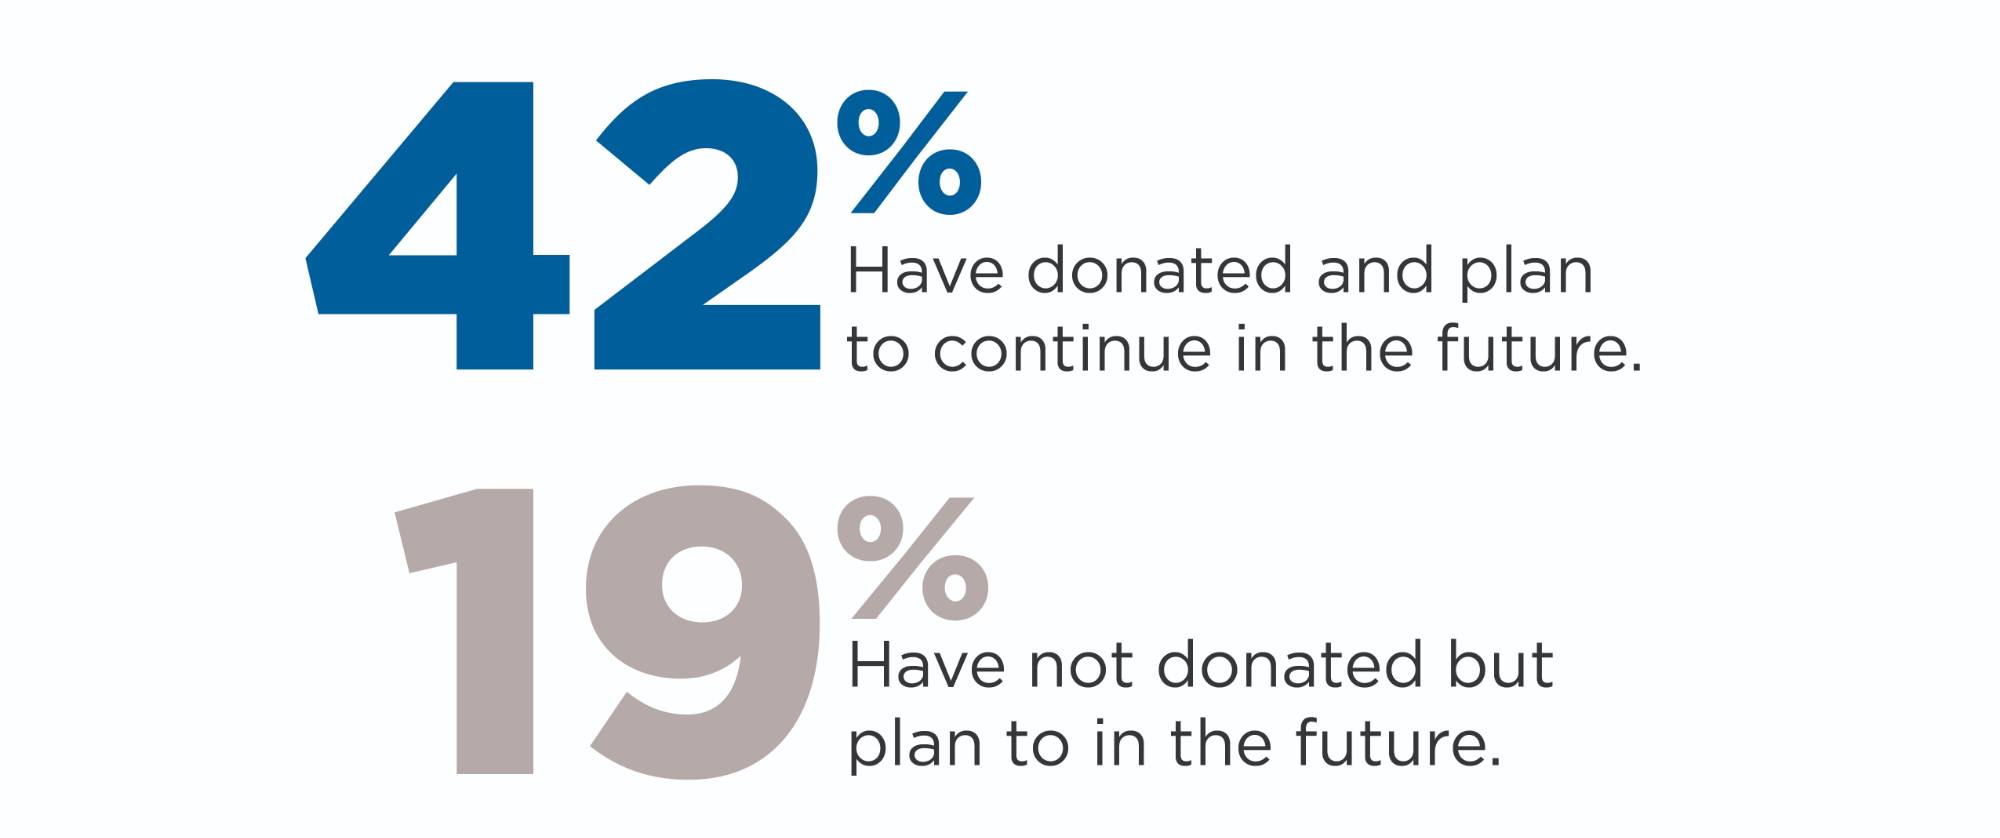 42% of alumni have donated and plan to continue in the future. 19% have not donated but plan to in the future.